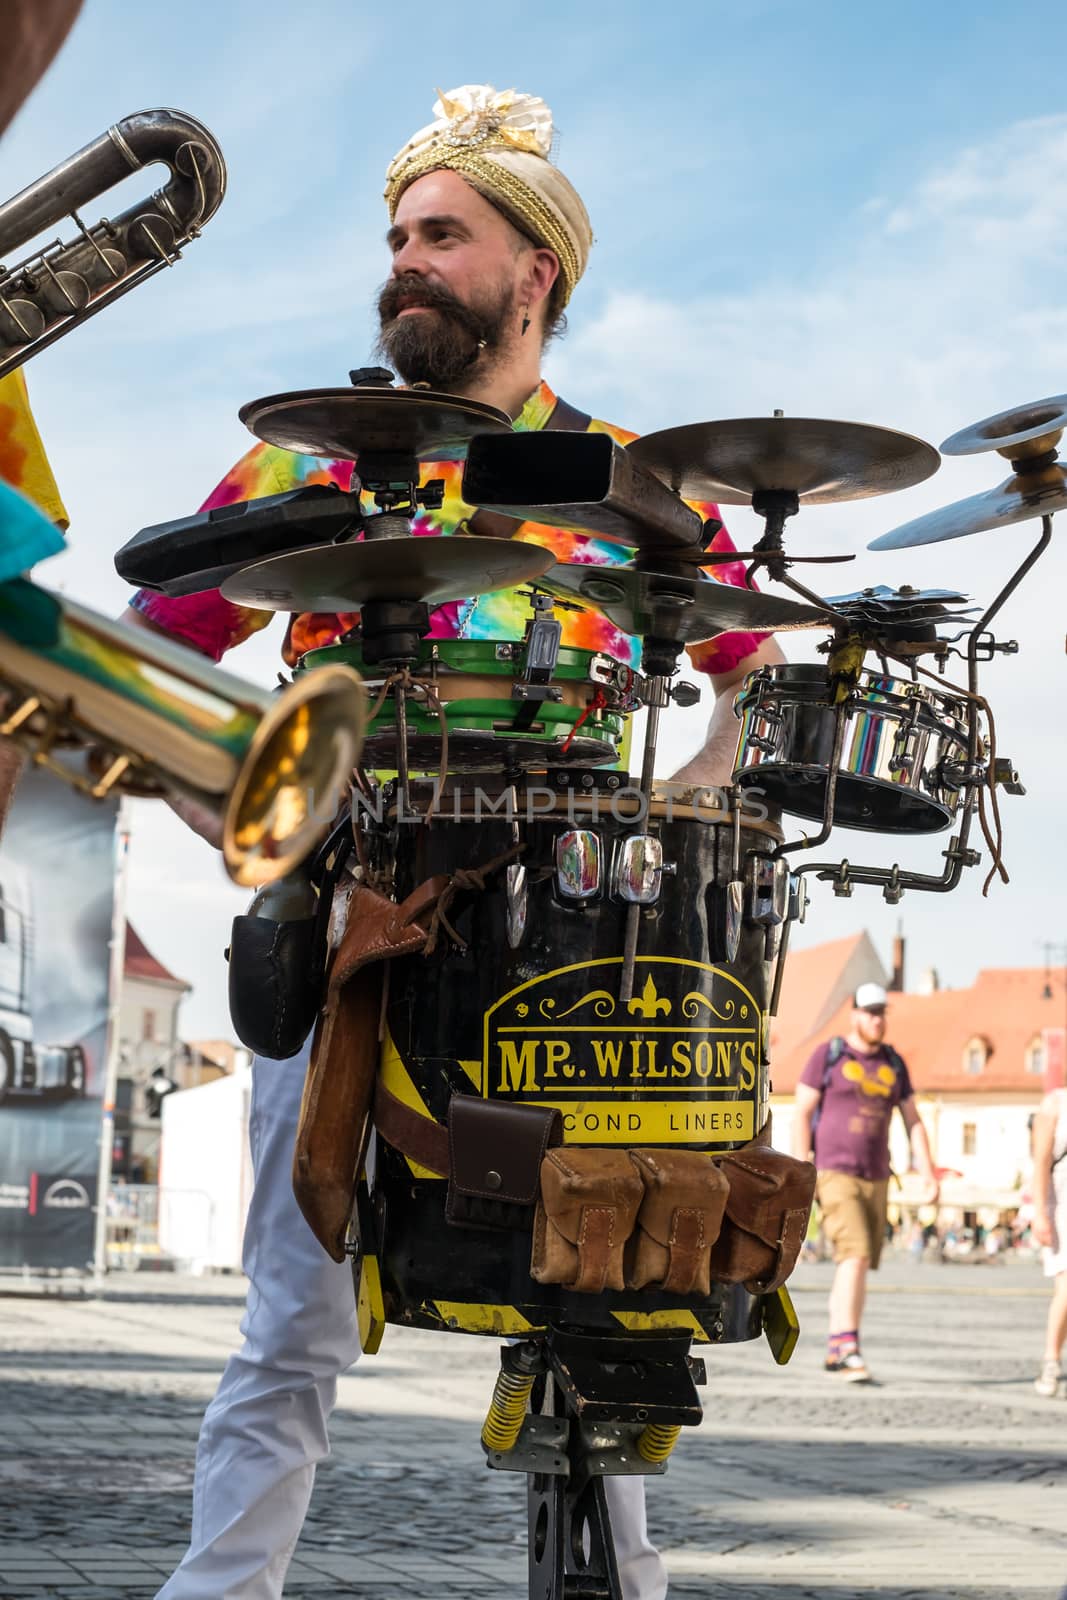 Sibiu City, Romania - 19 June 2019. Mr Wilson's Second Liners from UK, performing at the Sibiu International Theatre Festival from Sibiu, Romania.